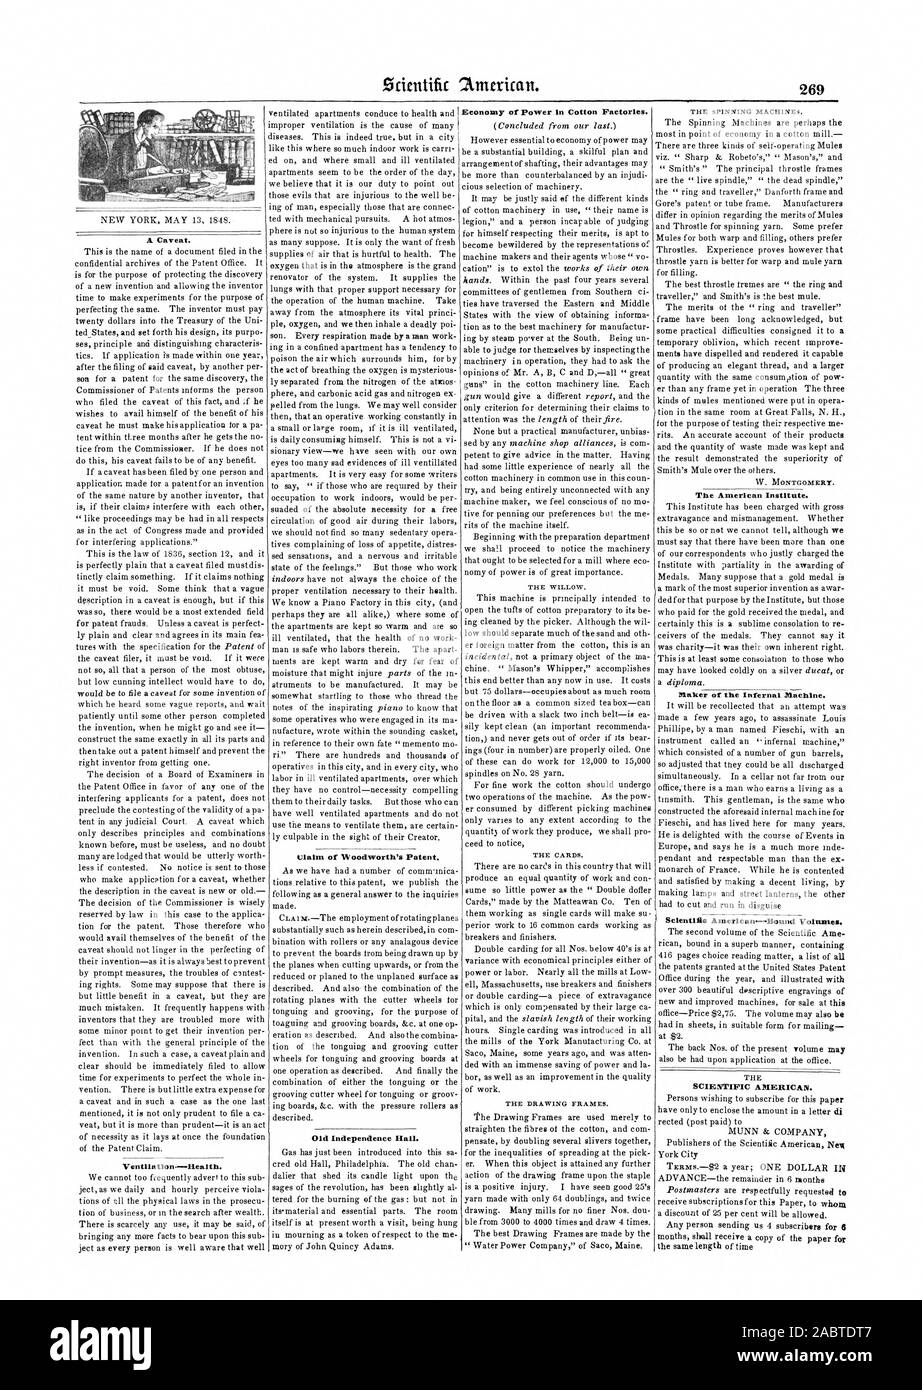 A Caveat. Ventilation.--Health. Ulaim of Woodworth'S Patent. Old Independence Hall. Econoiny of Power in Cotton Factories. THE WILLOW. THE CARDS. THE DRAWING FRAMES. THE SPINNING MACHINES. The American Institute. Maker of the Infernal Machine. Scientific American--Bound Volumes. SCIENTIFIC AMERICAN., 1848-05-13 Stock Photo